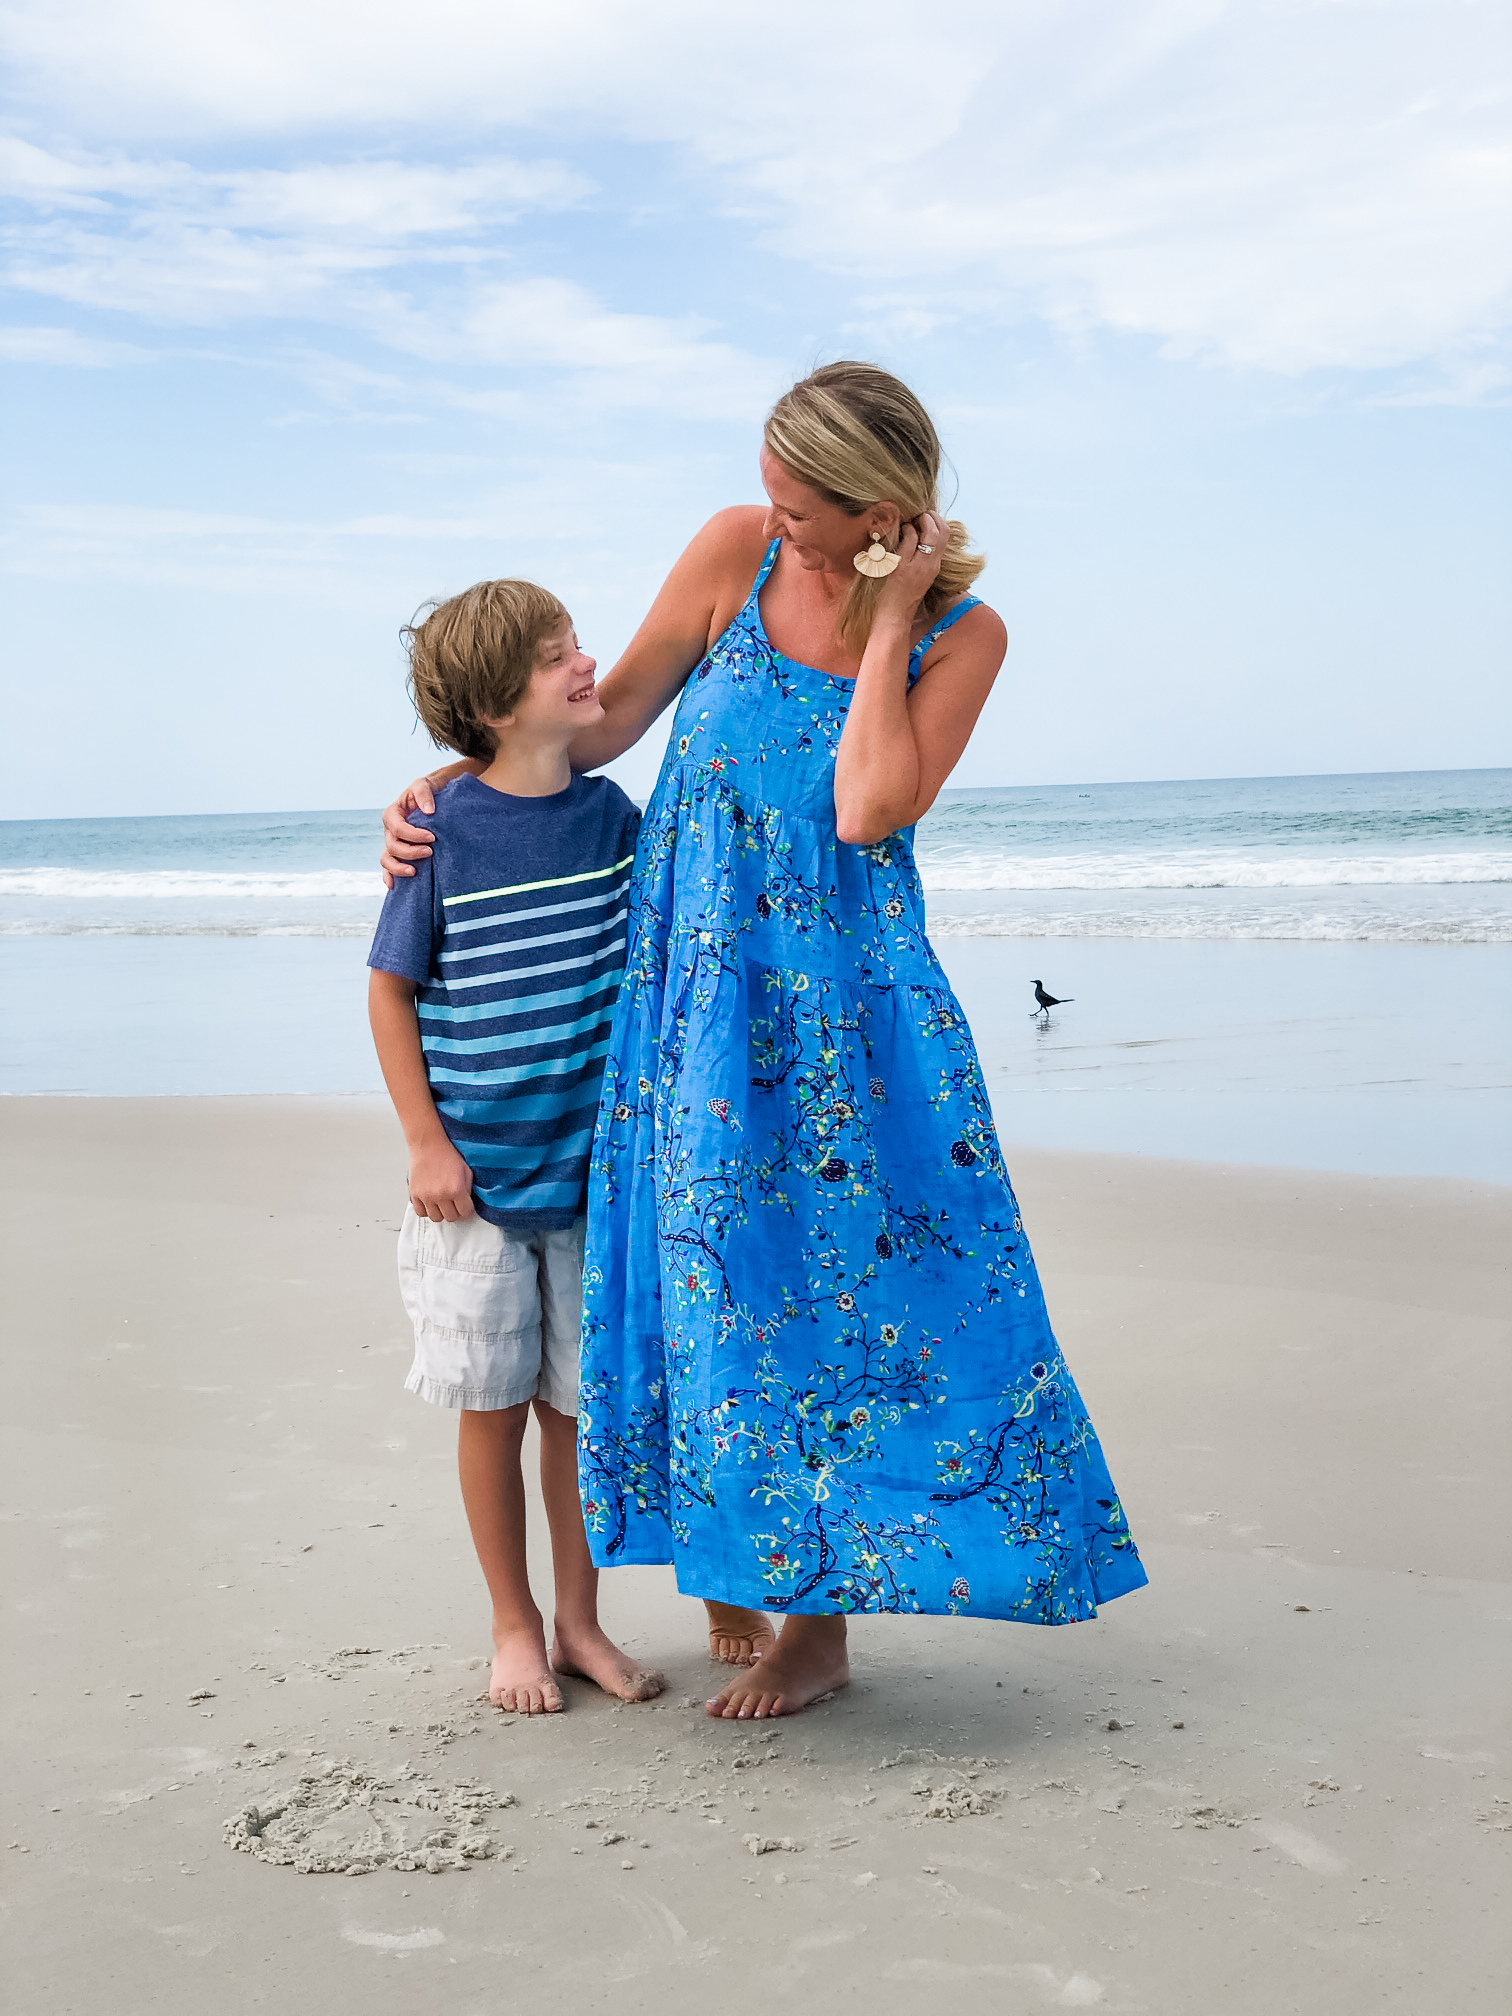 Family beach photo outfits - What to Wear - Hawaii Photographer | Wilde  Sparrow Photography